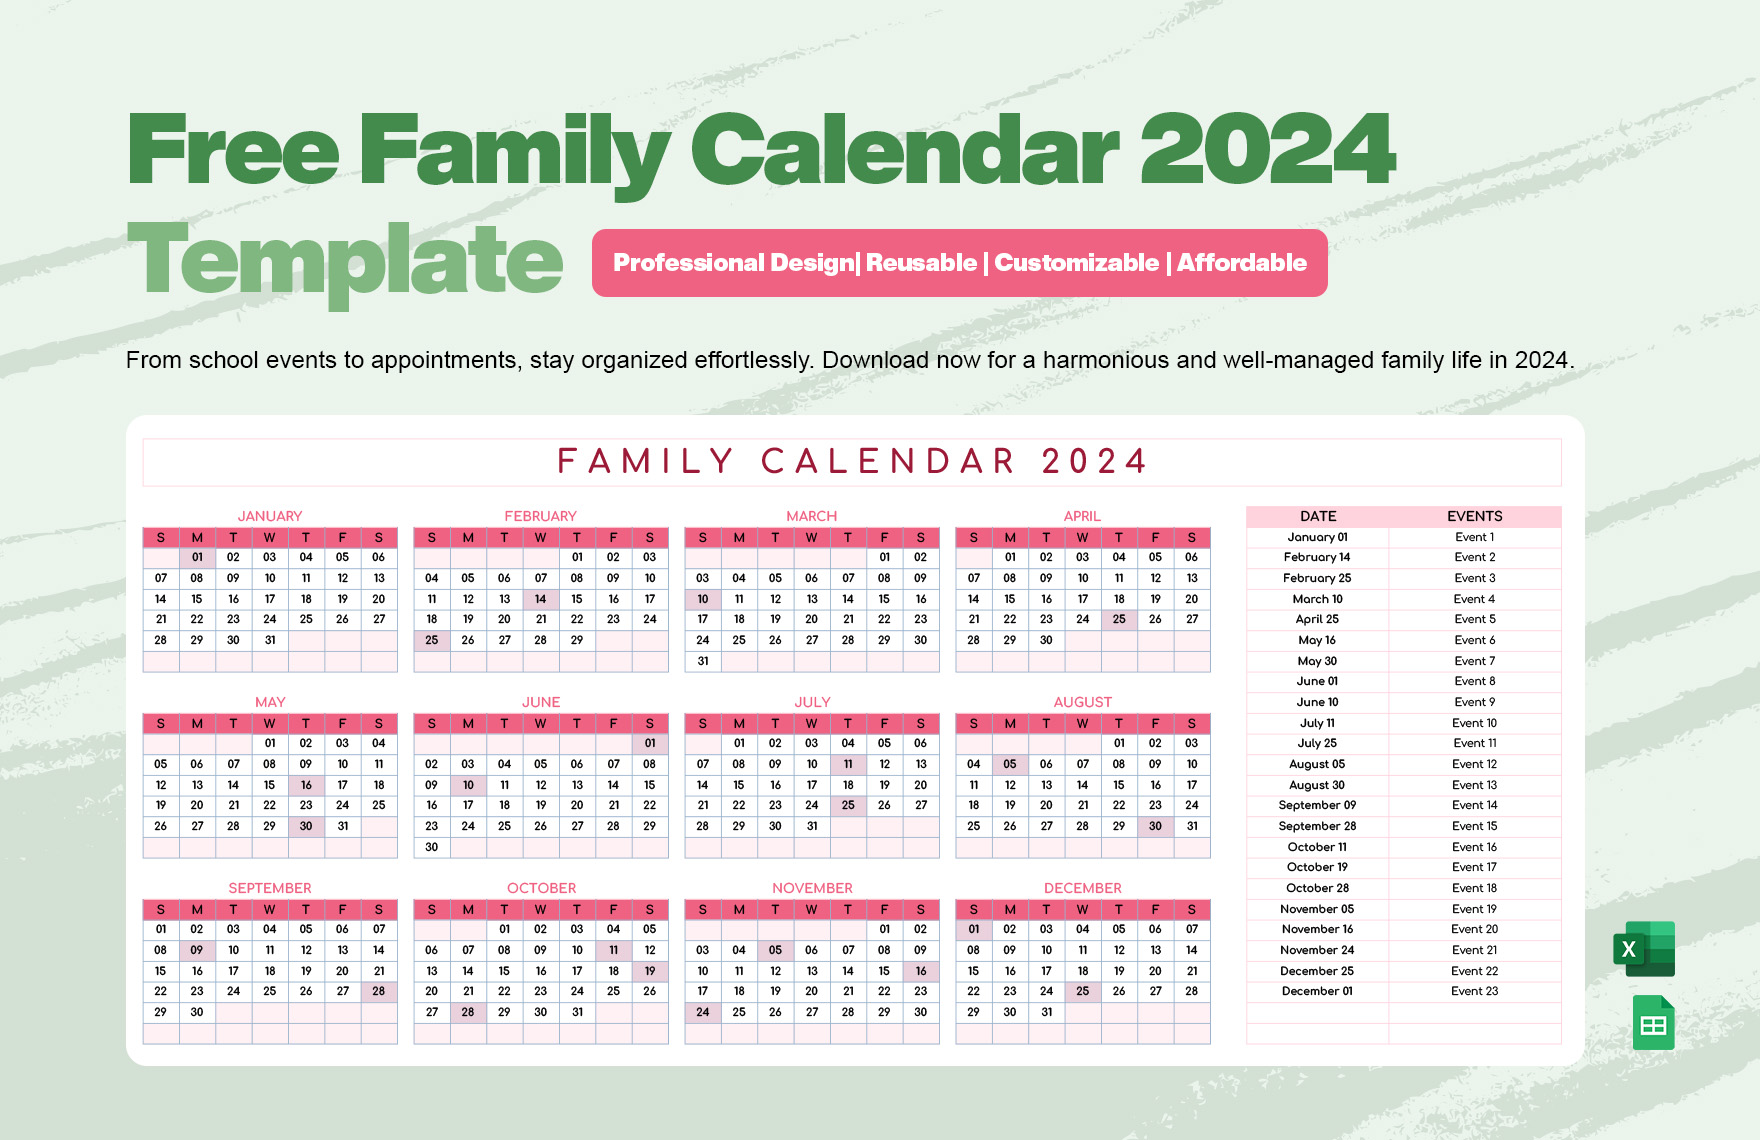 Free Family Calendar 2024 Template Download in Excel, Google Sheets